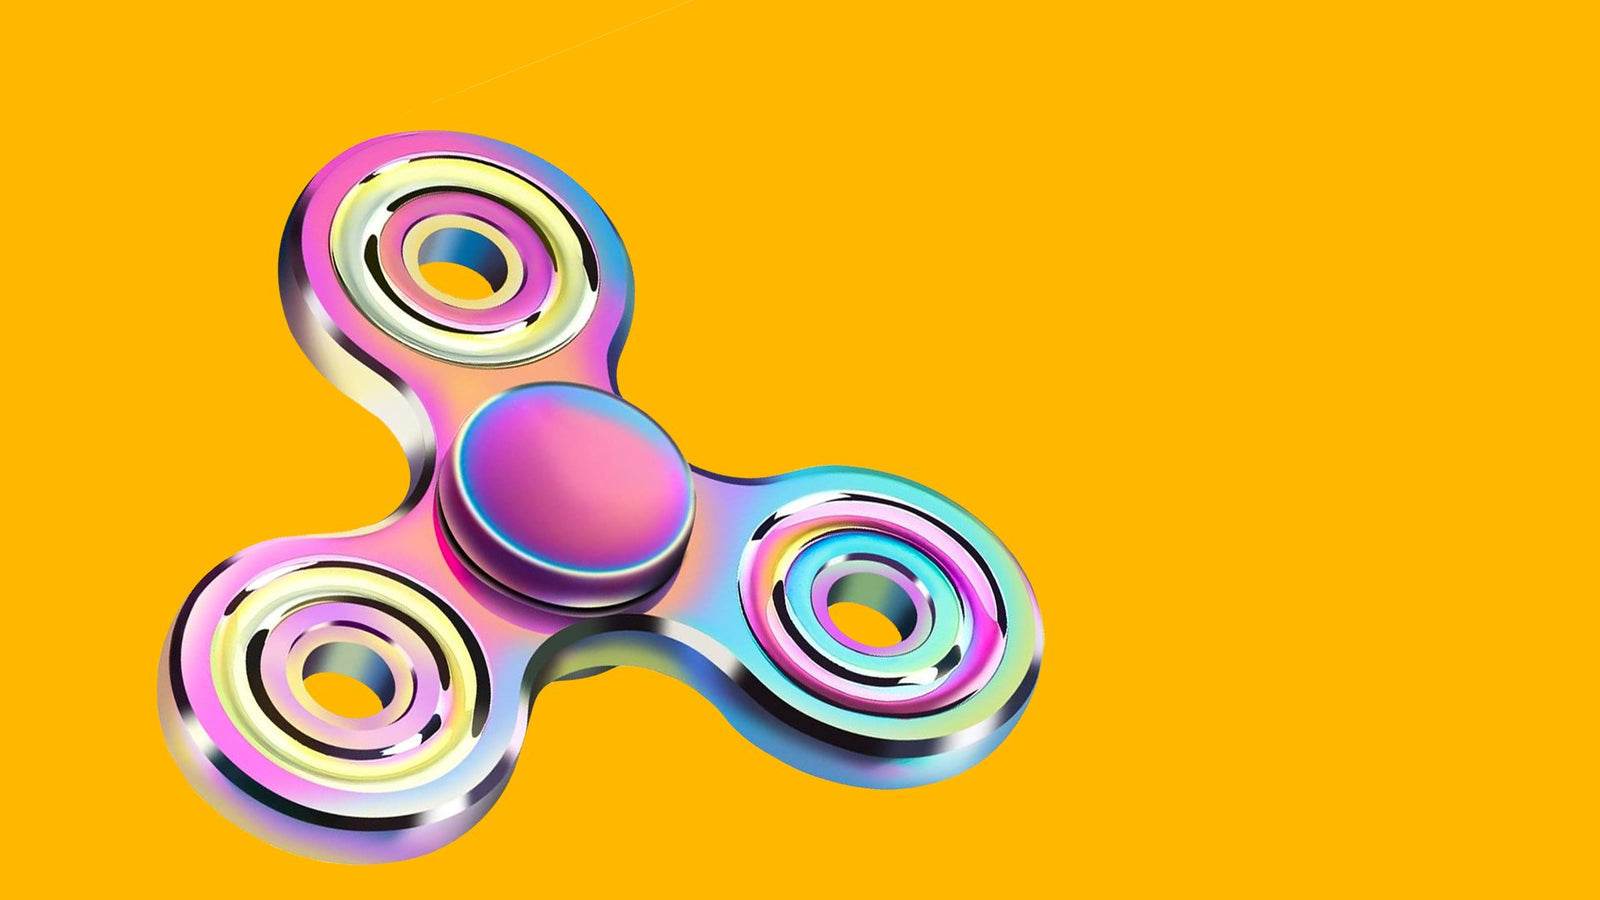 About Fidget Spinners